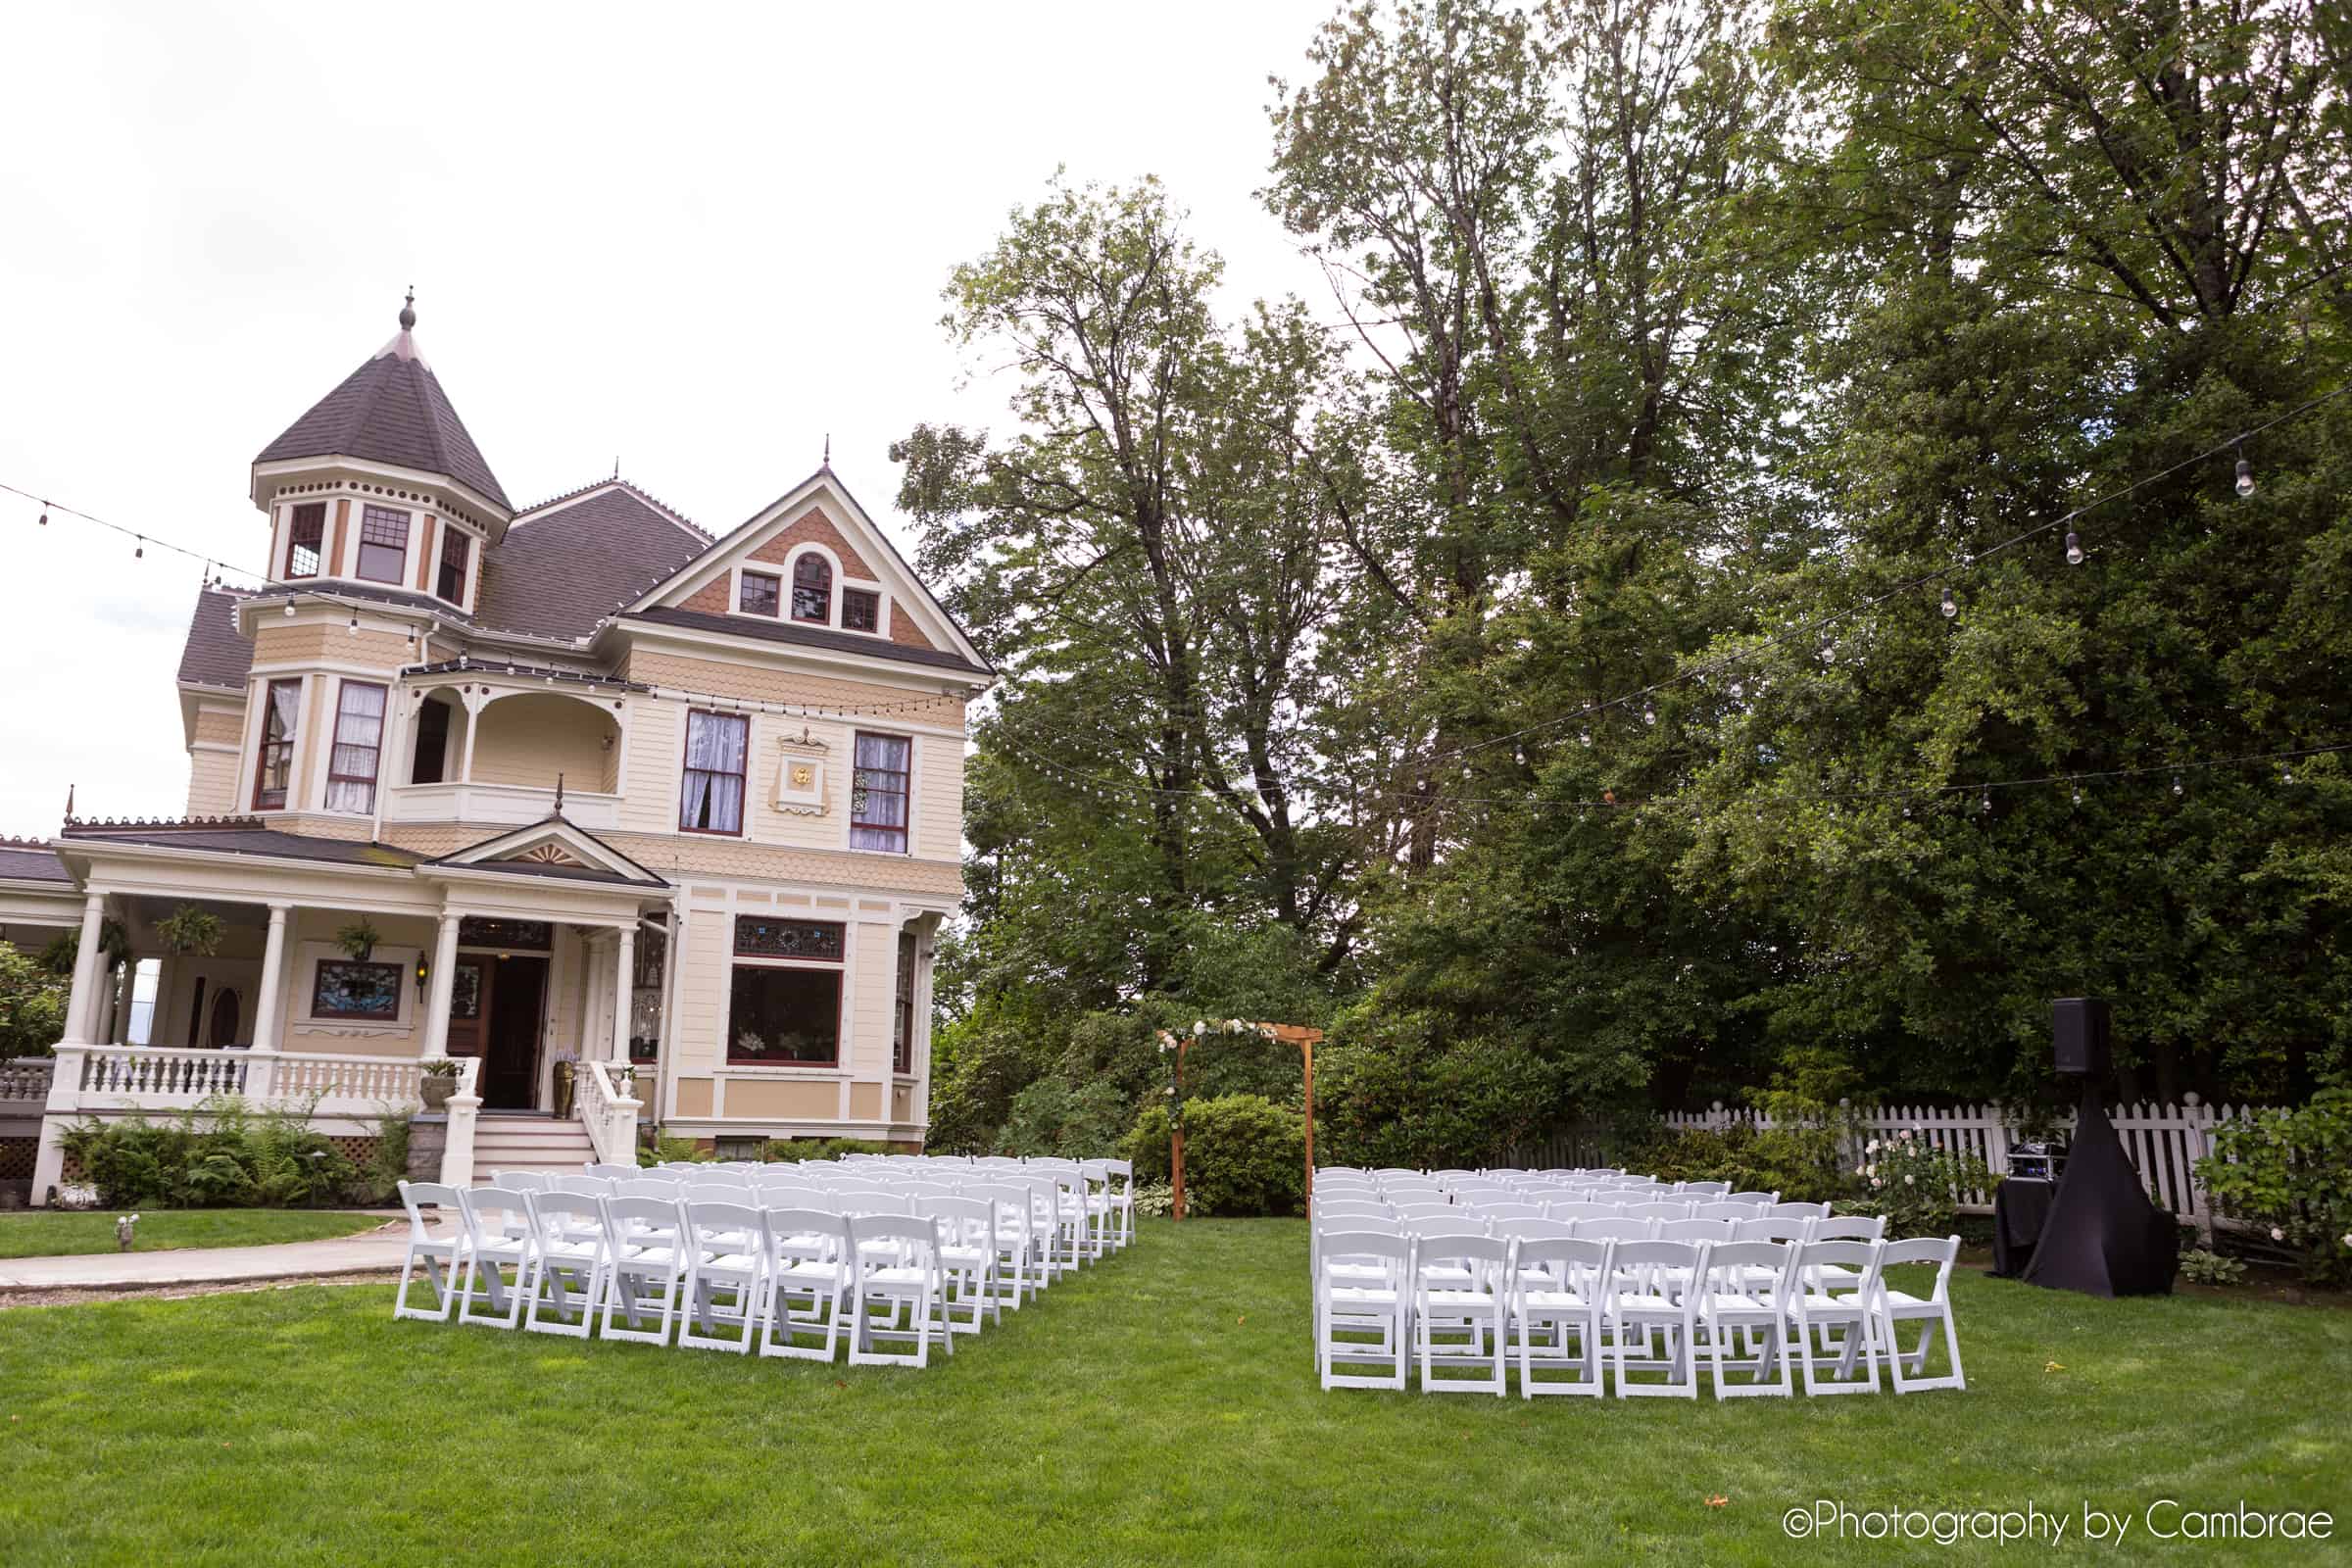 A wedding ceremony with two blocks of chairs and an arbor stand in front of an ornate Victorian mansion.